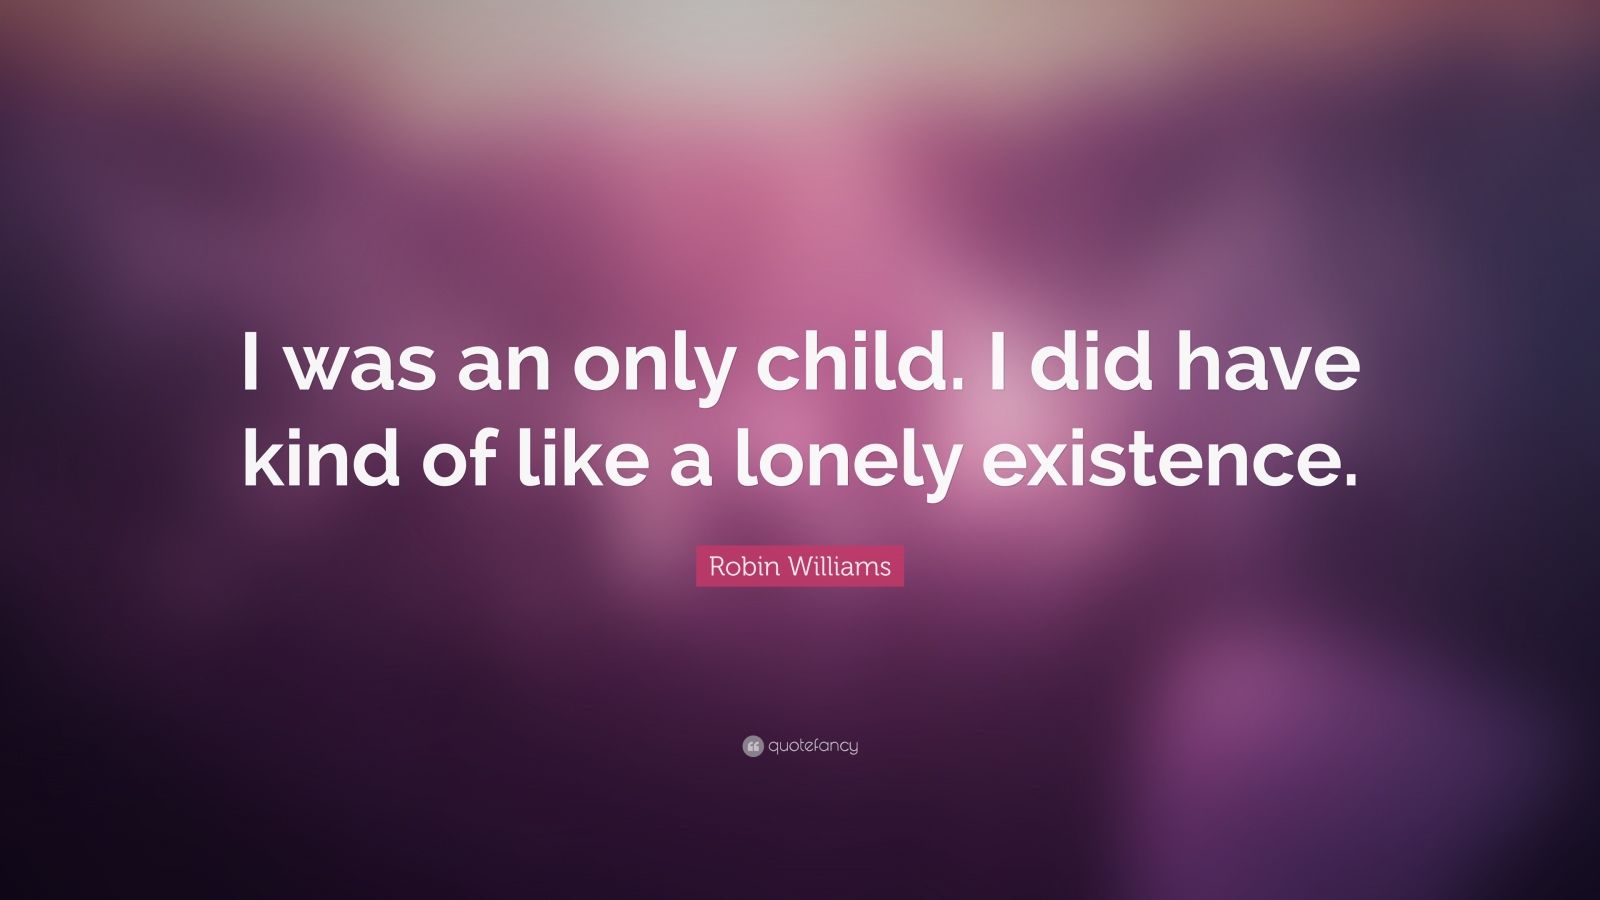 Robin Williams Quote: “I was an only child. I did have kind of like a ...